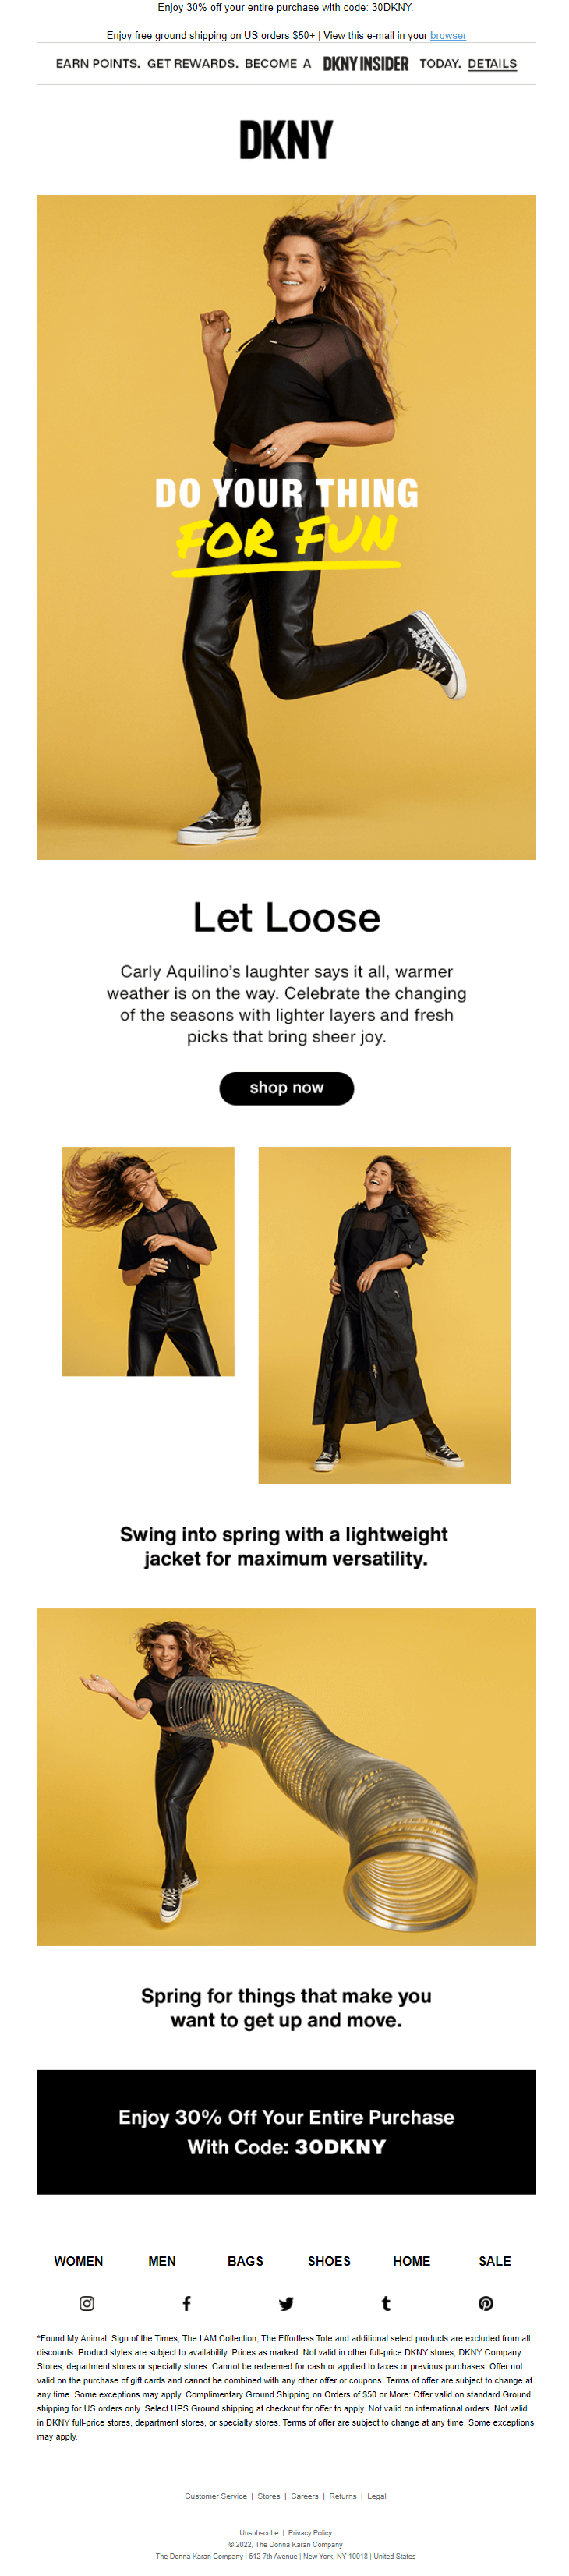 DKNY Spring Summer 2022 email